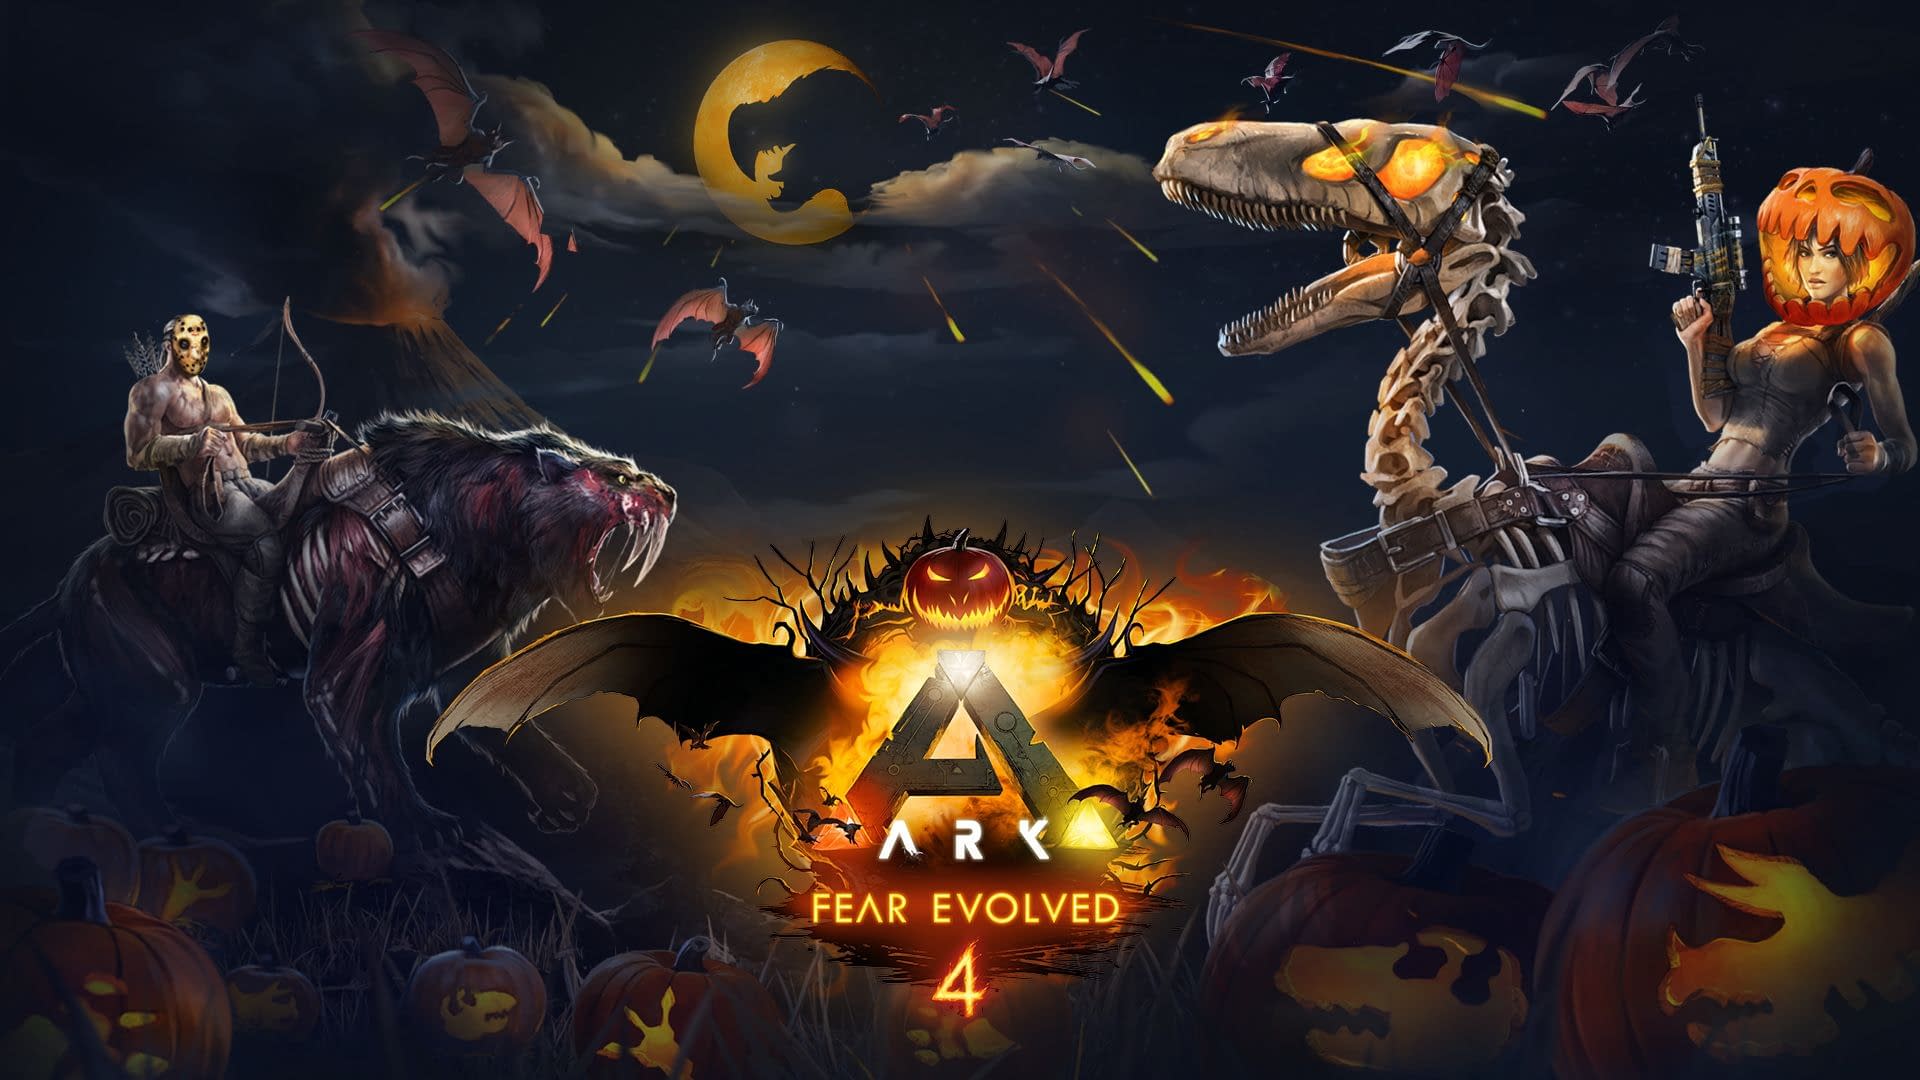 ARK: Survival Launches Their Fourth "Fear Evolved" Event